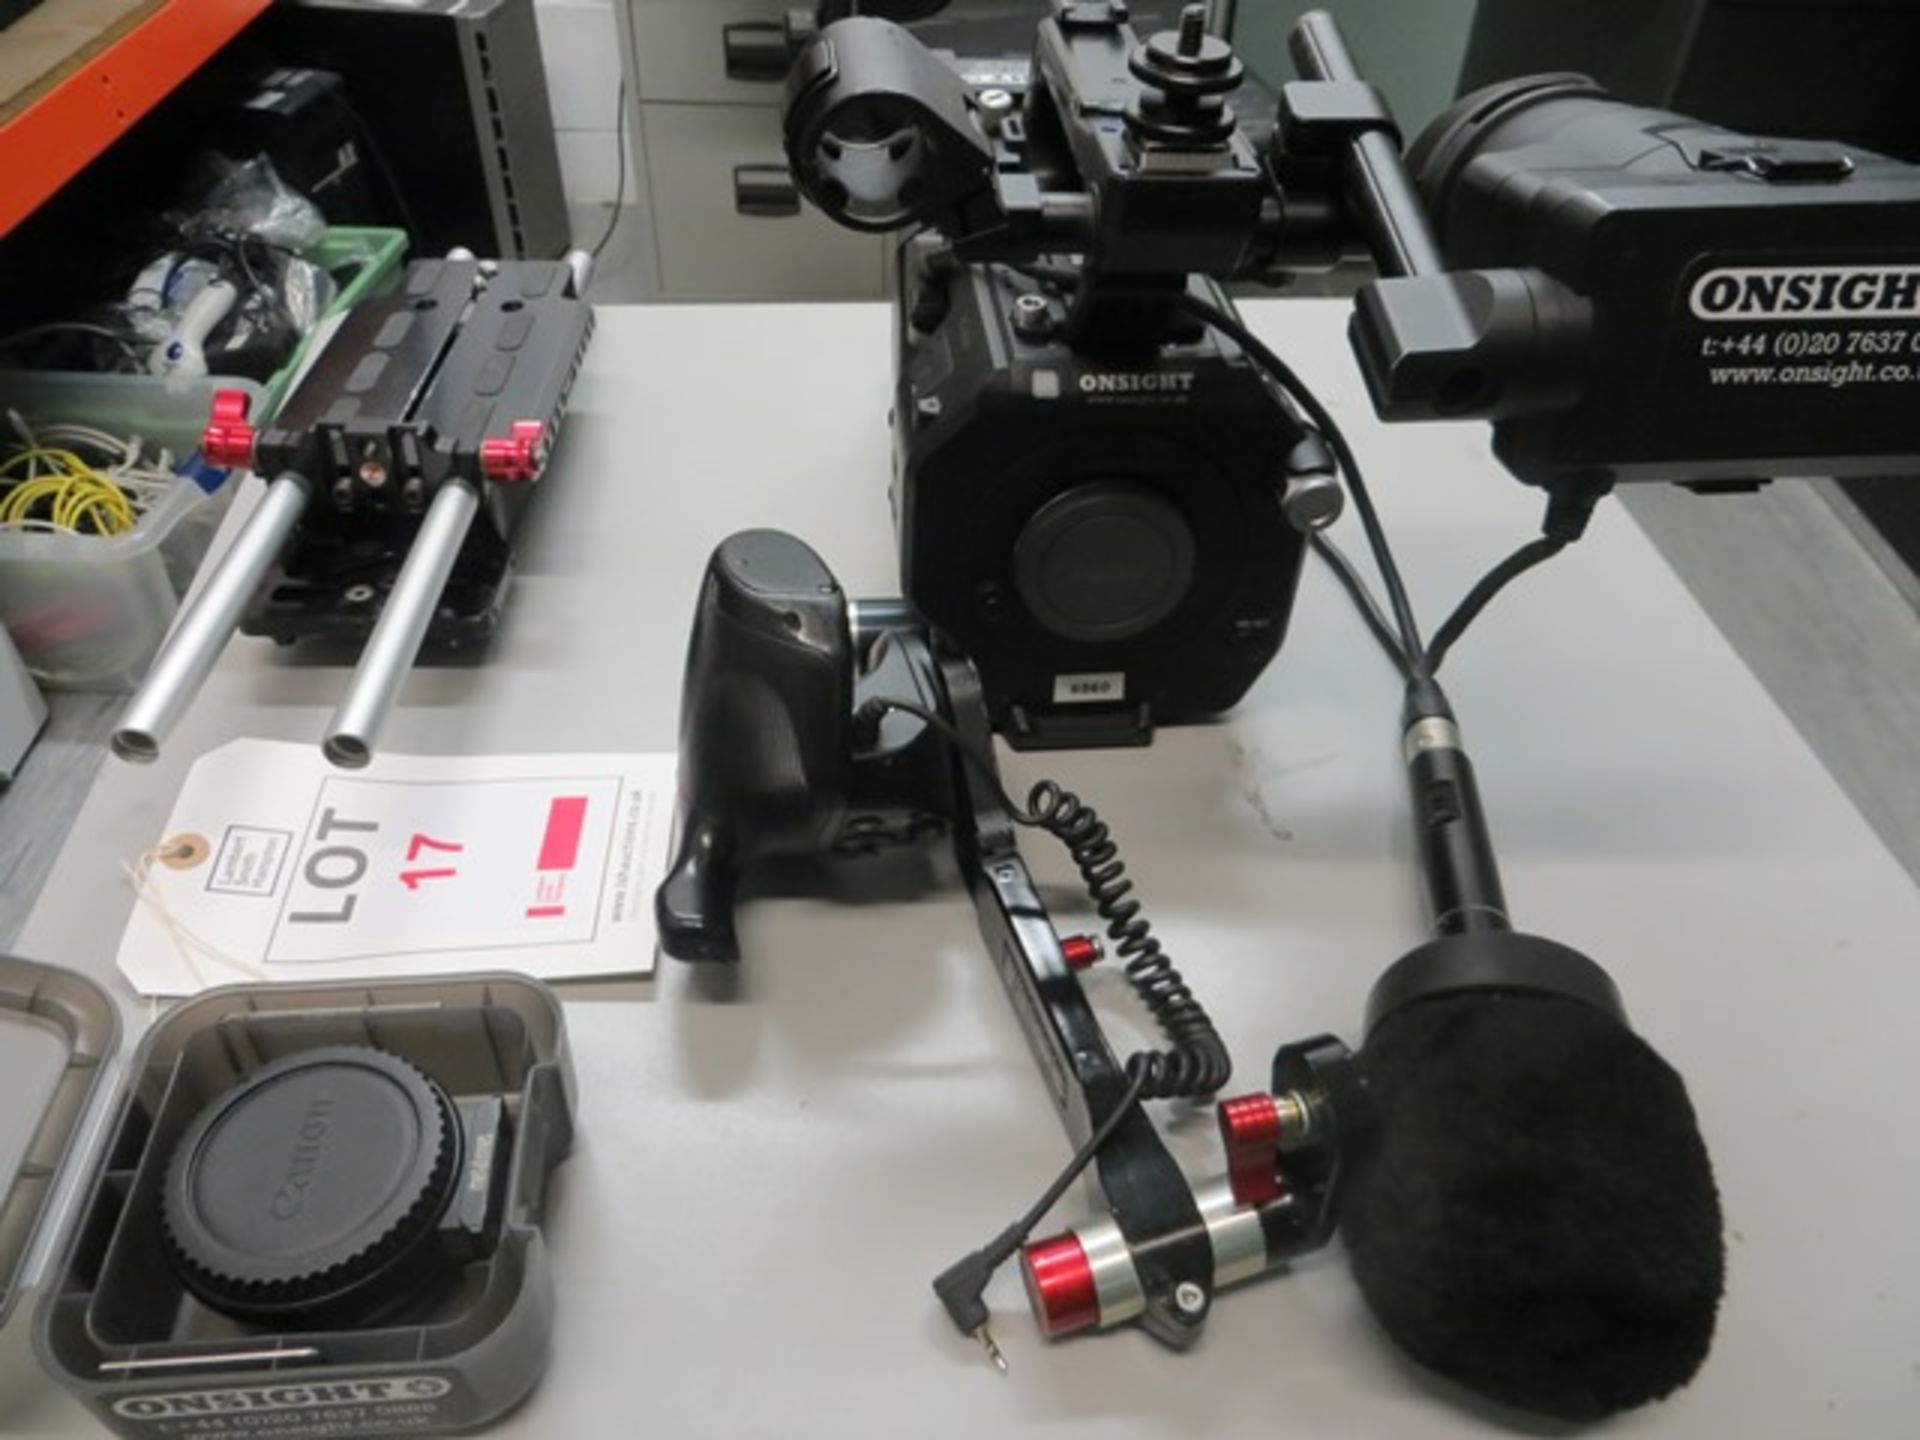 Sony PXW-FS7 4K Camcorder Super XD Camera s/n 34576 c/w plate mounts, Canon Metabones EF to E - Image 2 of 5